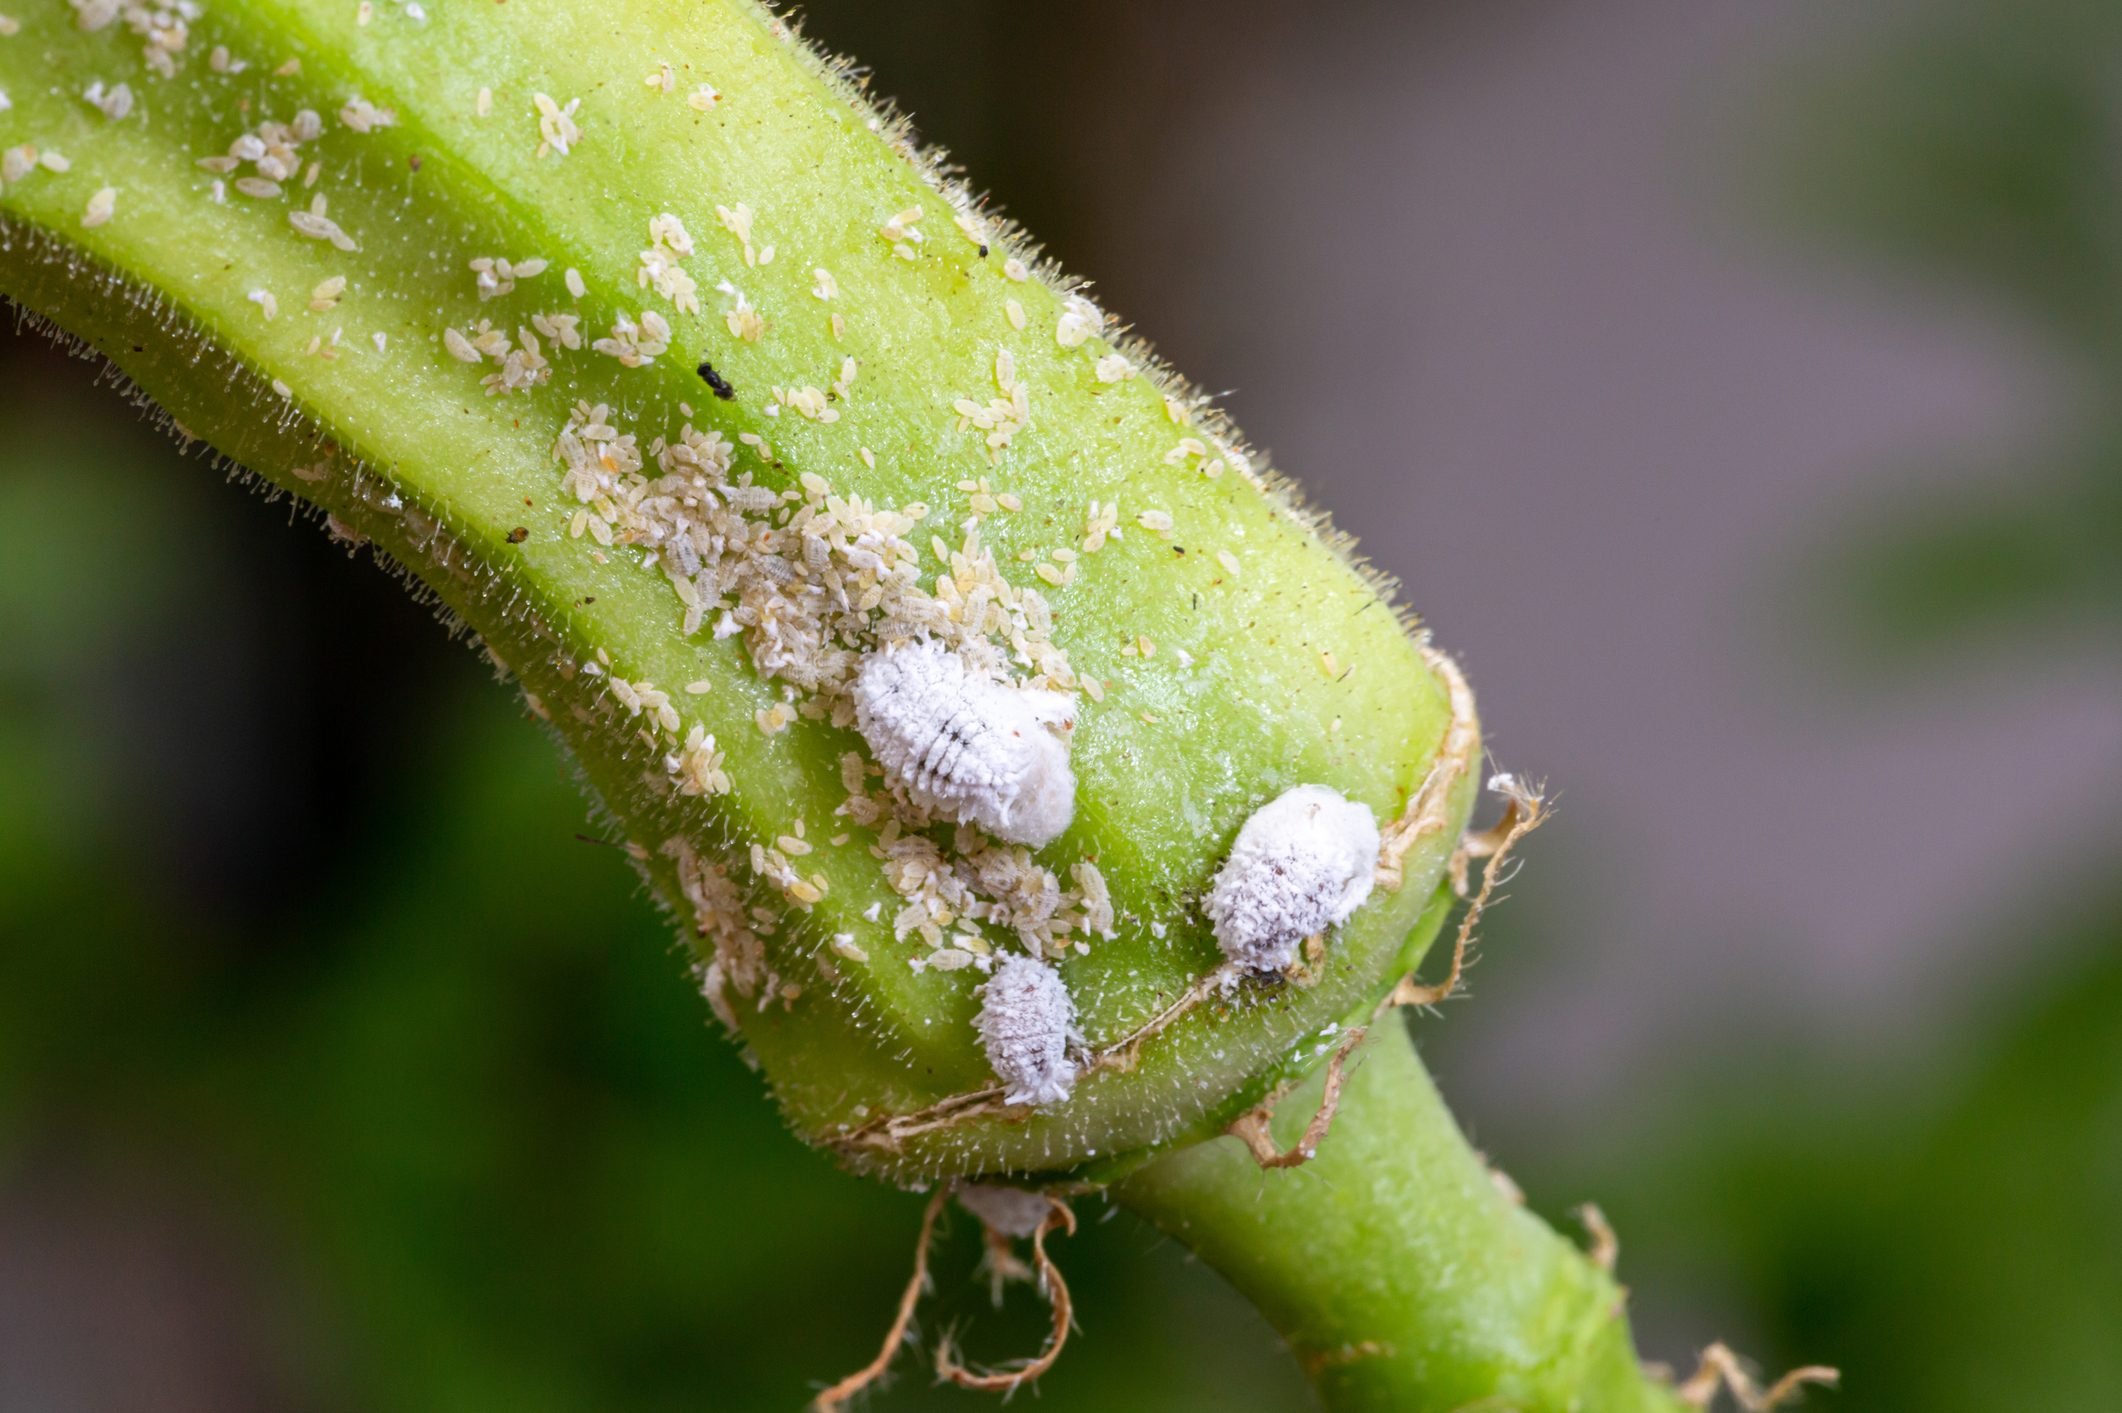 How to Get Rid of Mealybugs: 7 Easy Methods